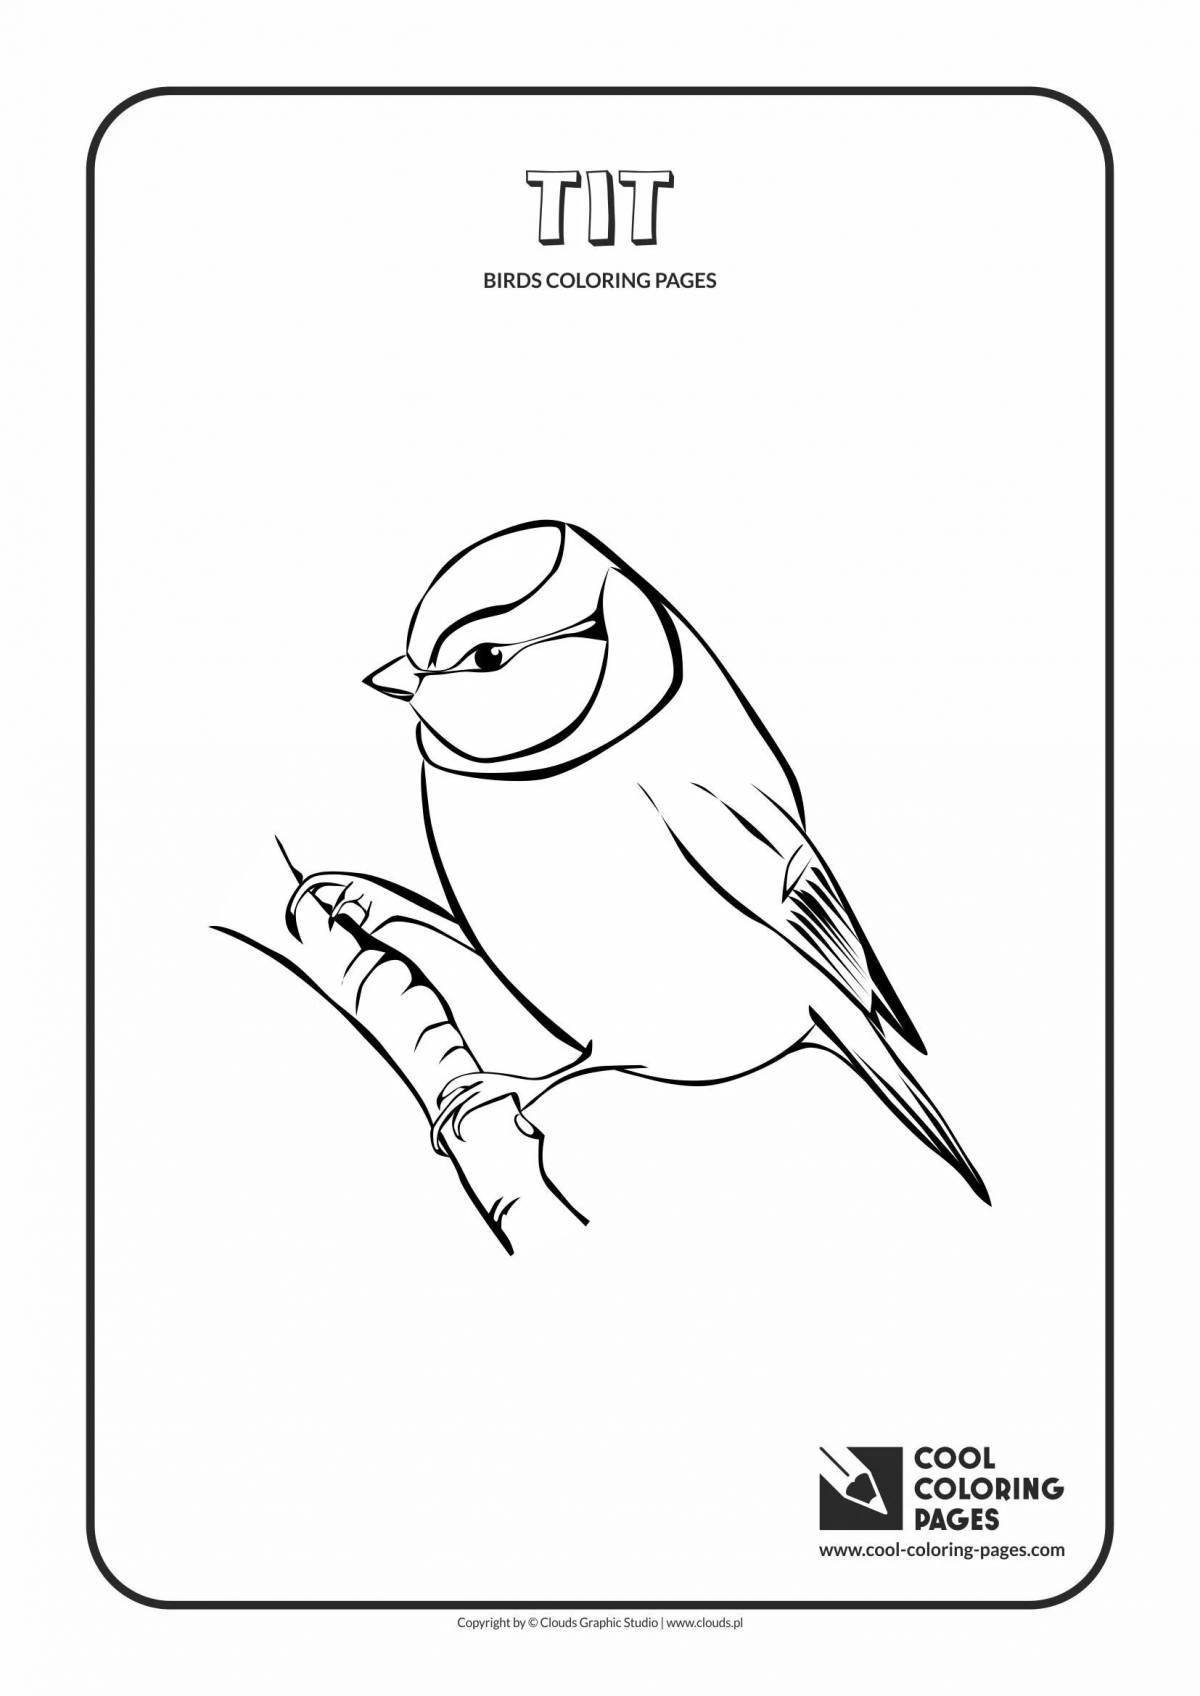 Cheerful tit coloring for kids